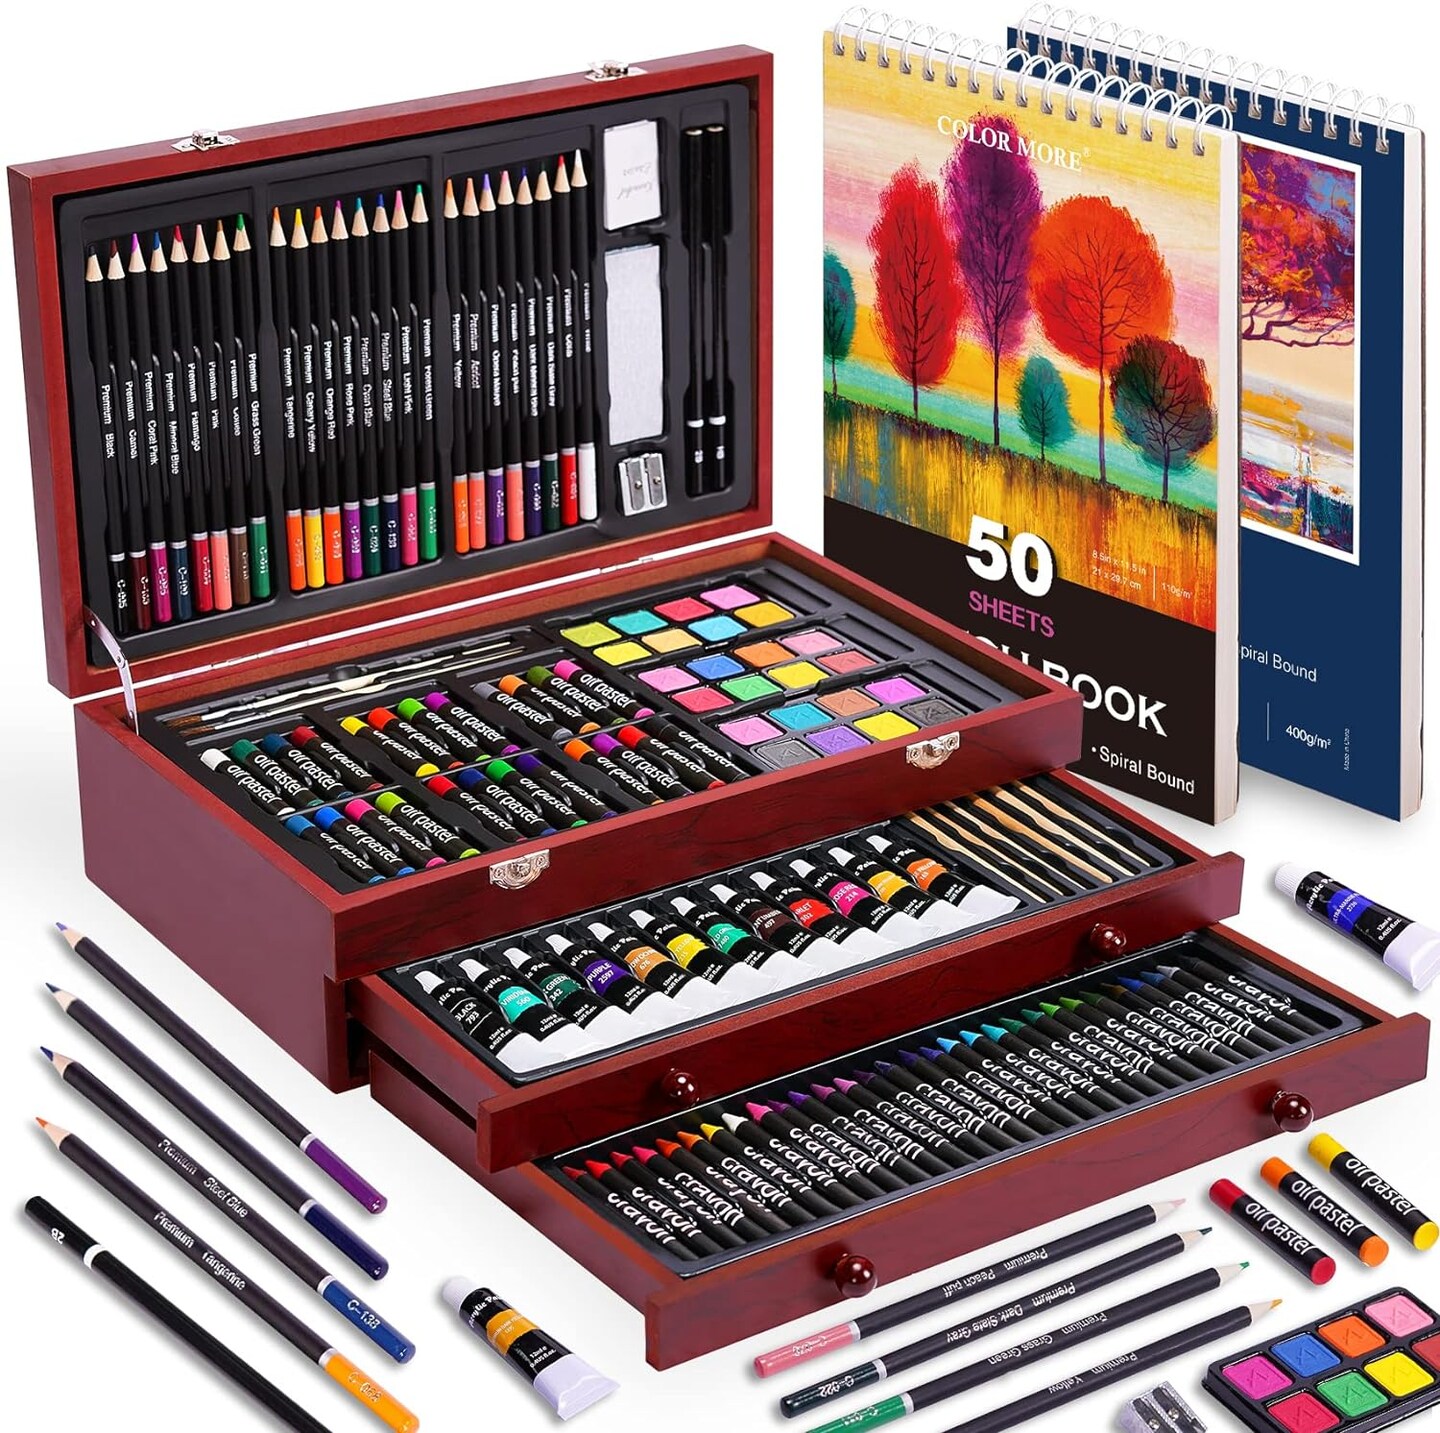 The 175-piece Deluxe Art Set includes two drawing pads, acrylic paints, crayons, and colored pencils. Set in Wooden Case, Professional Art Kit for Adults, Teens, and Artists, Paint Supplies